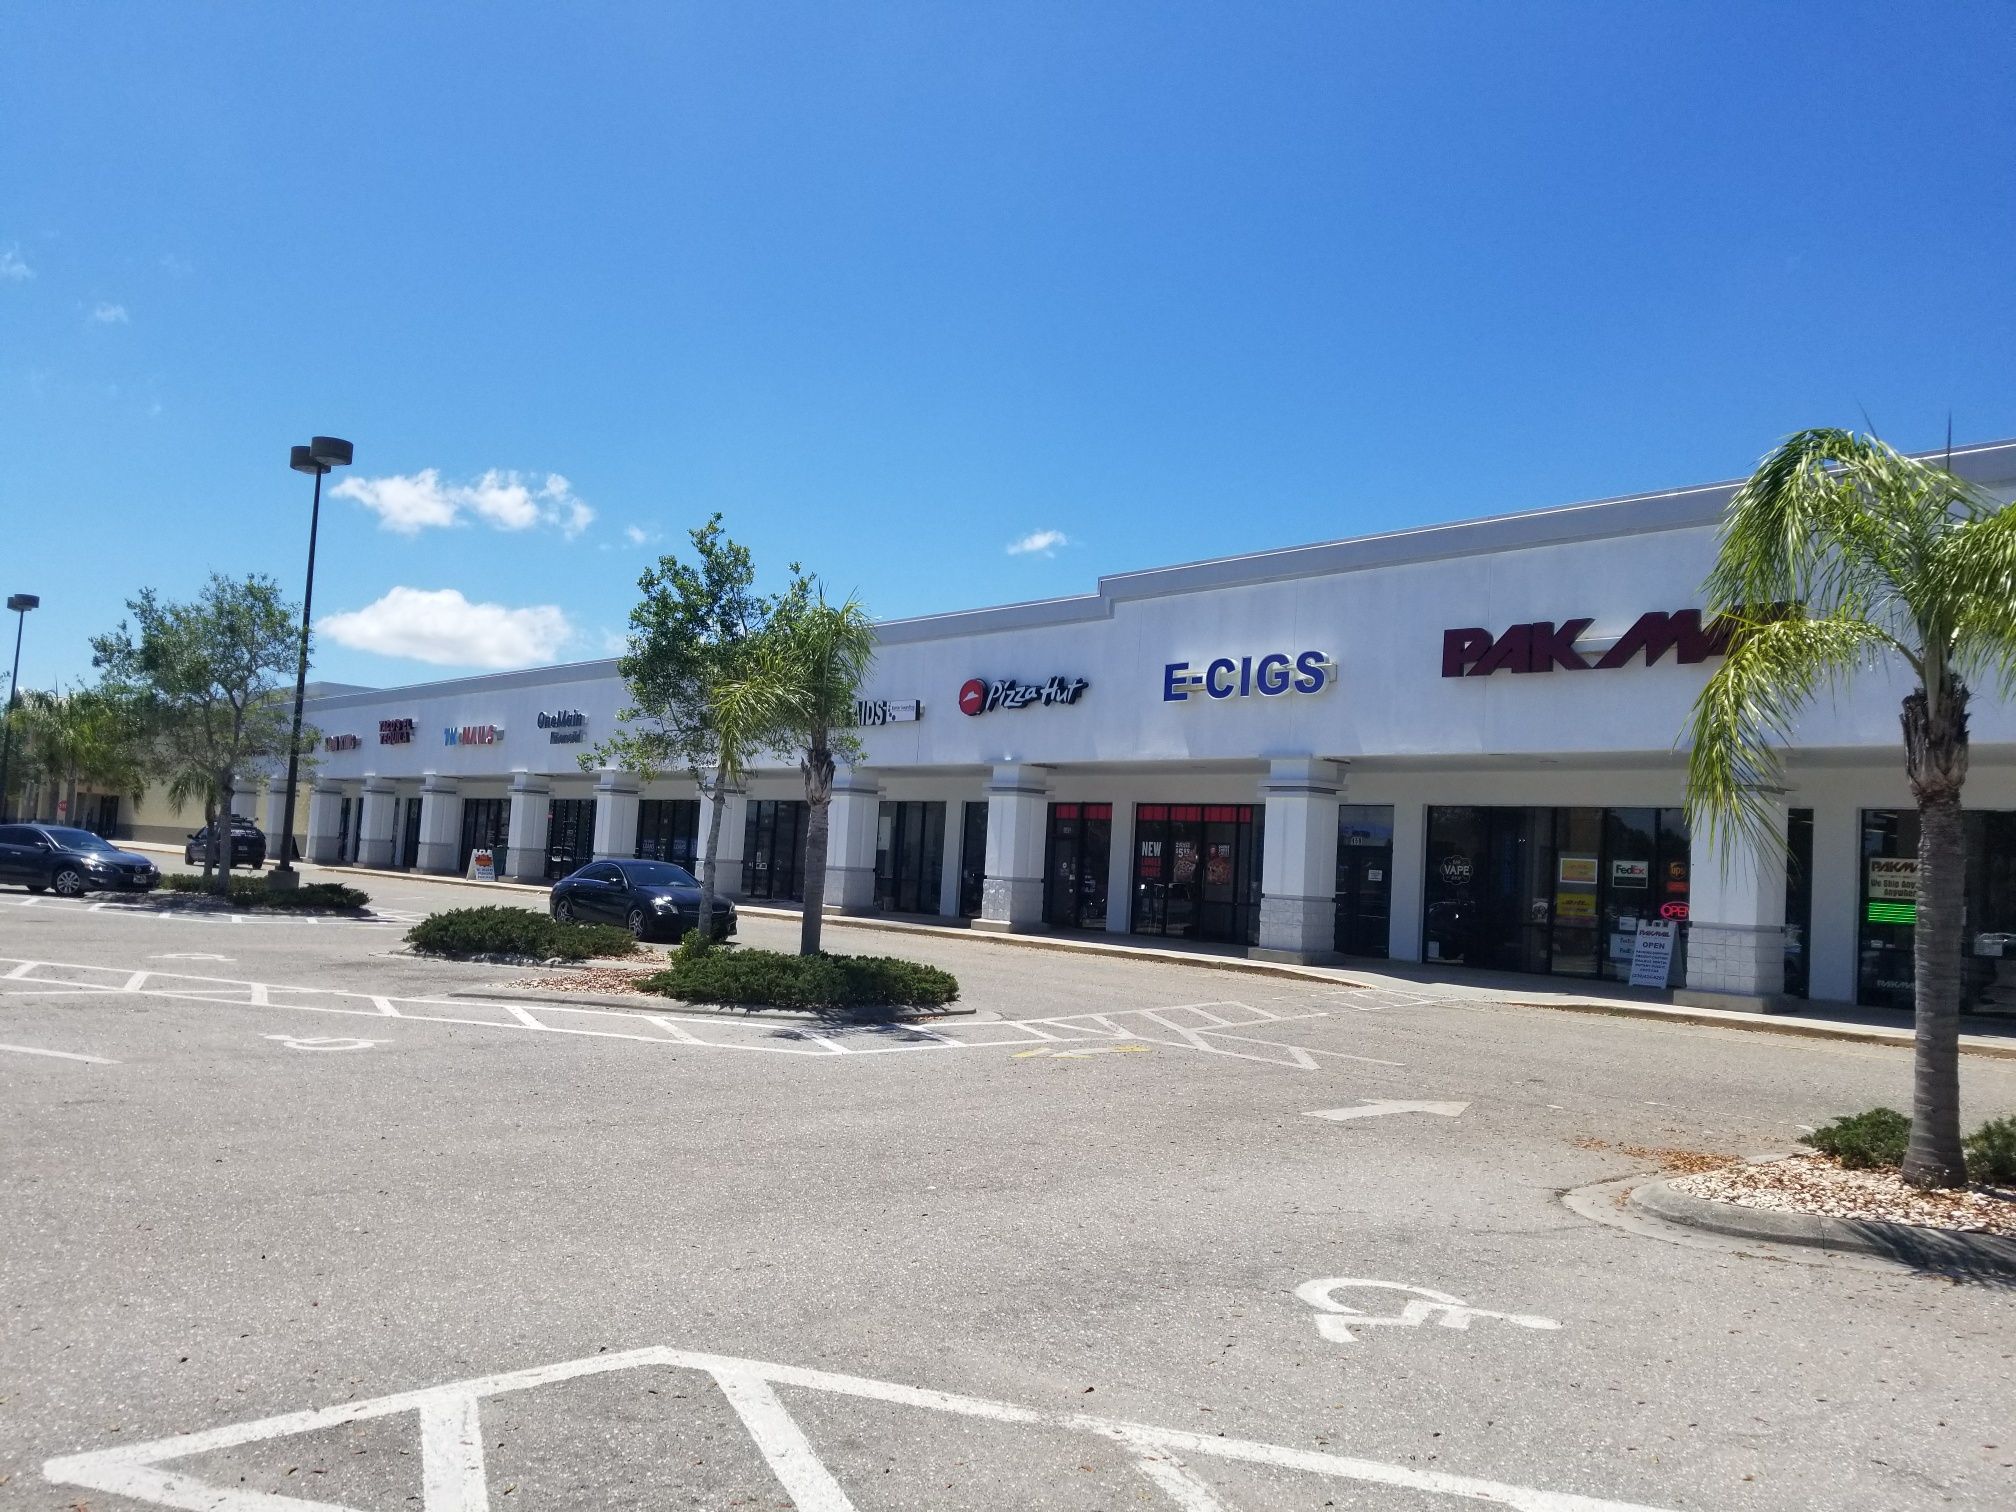 Commercial Strip Mall Painting in Naples, Florida